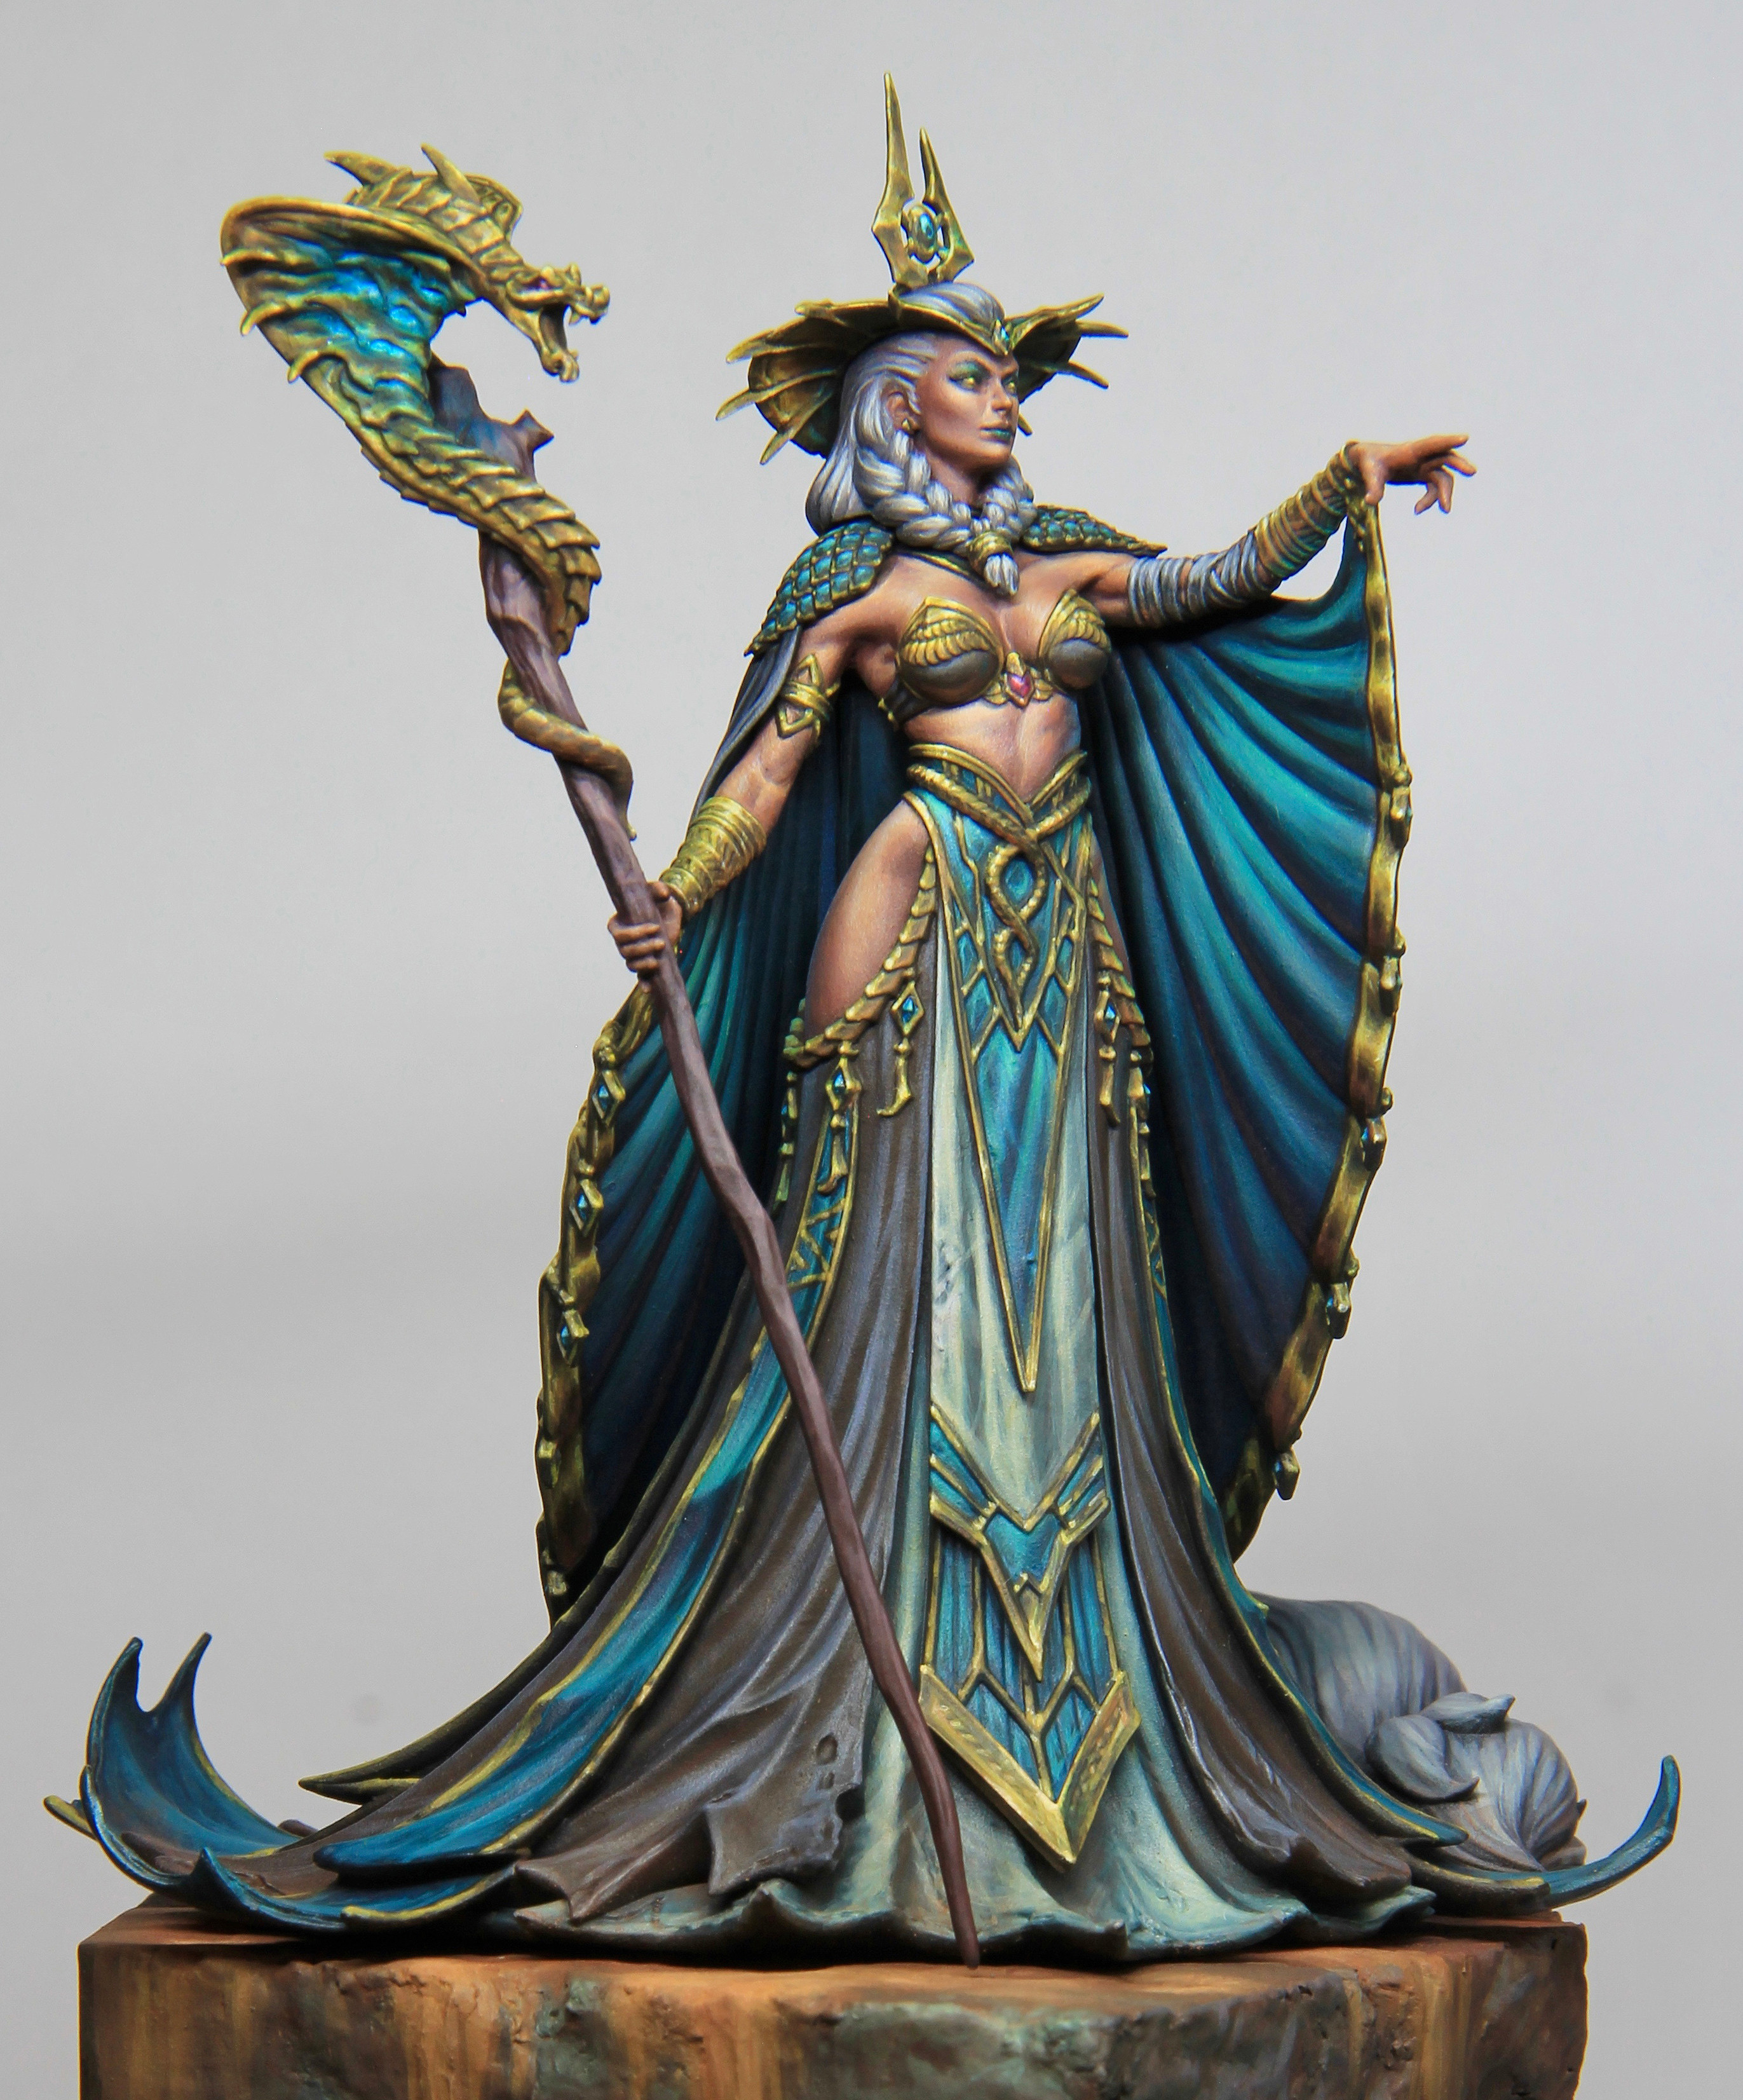 Actual Painted Miniature by Yisong Liu